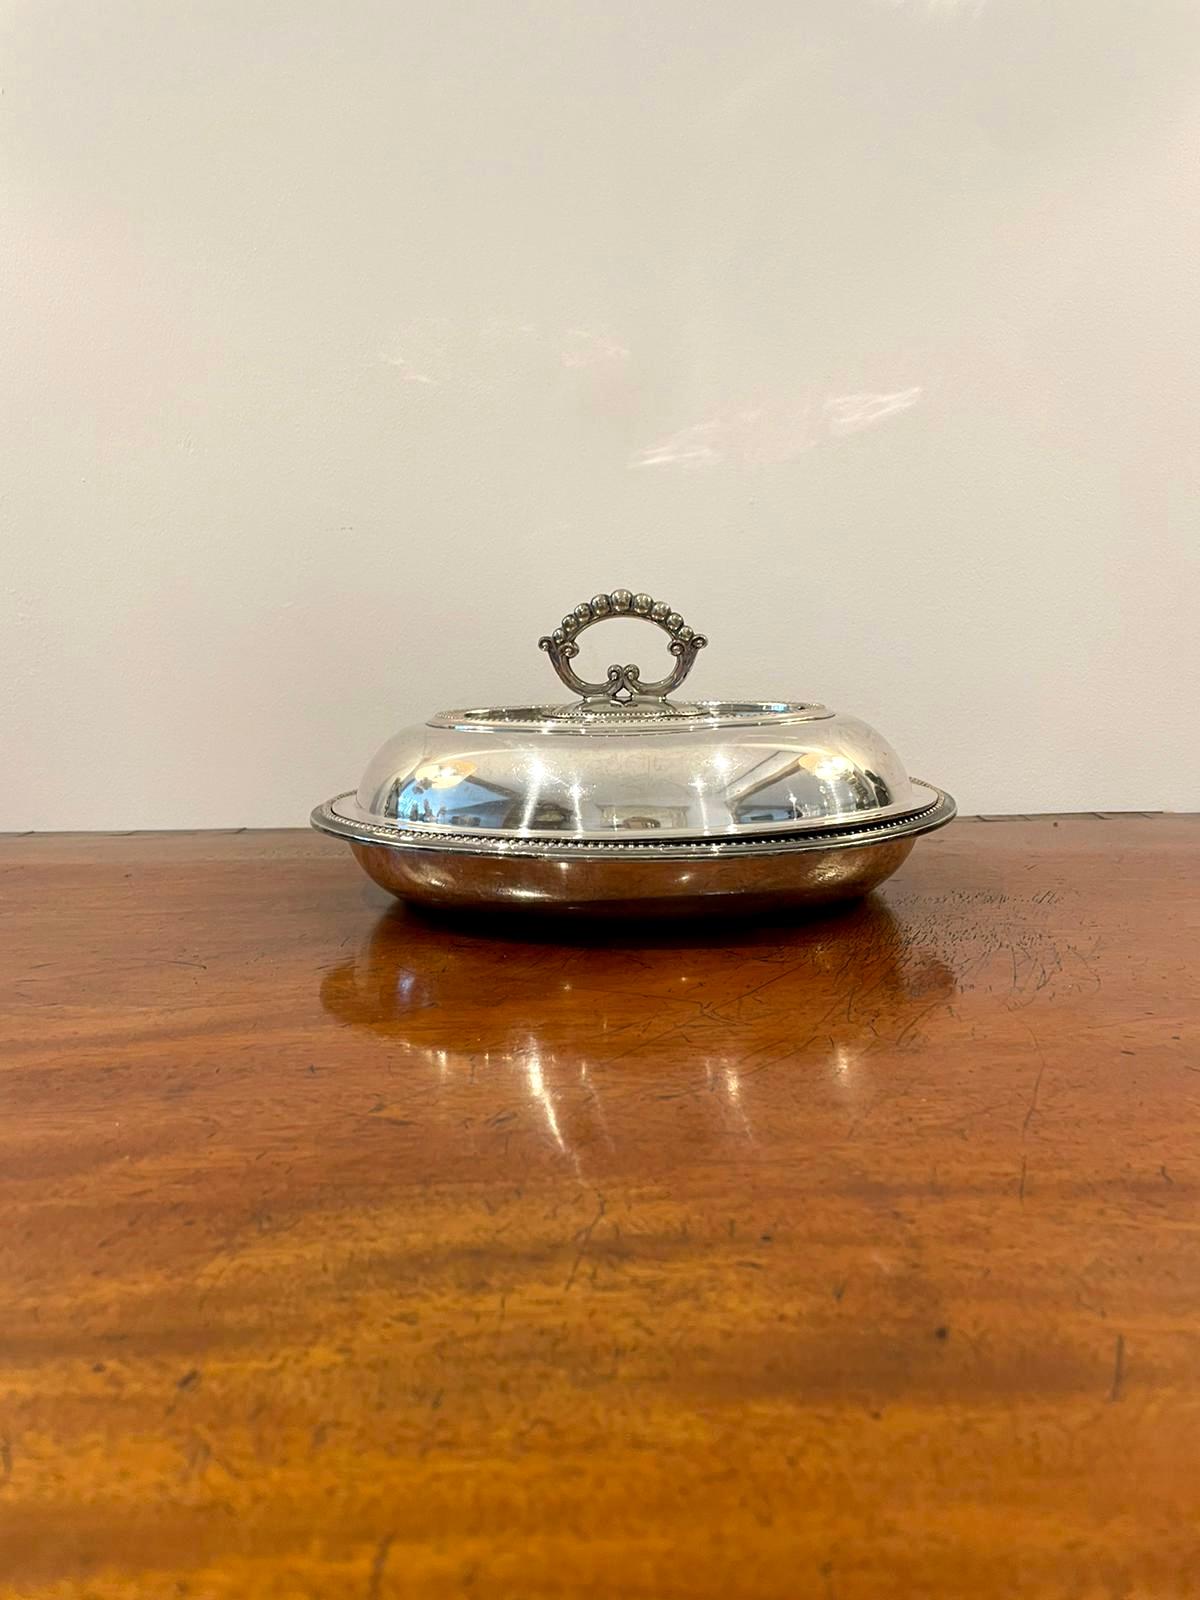 Antique Edwardian silver plated entrée dish having a silver plated entrée dish with a lift off lid with original handle and an ornate pretty border 

Measures: 14 x 28 x 22cm
Date 1900.
    